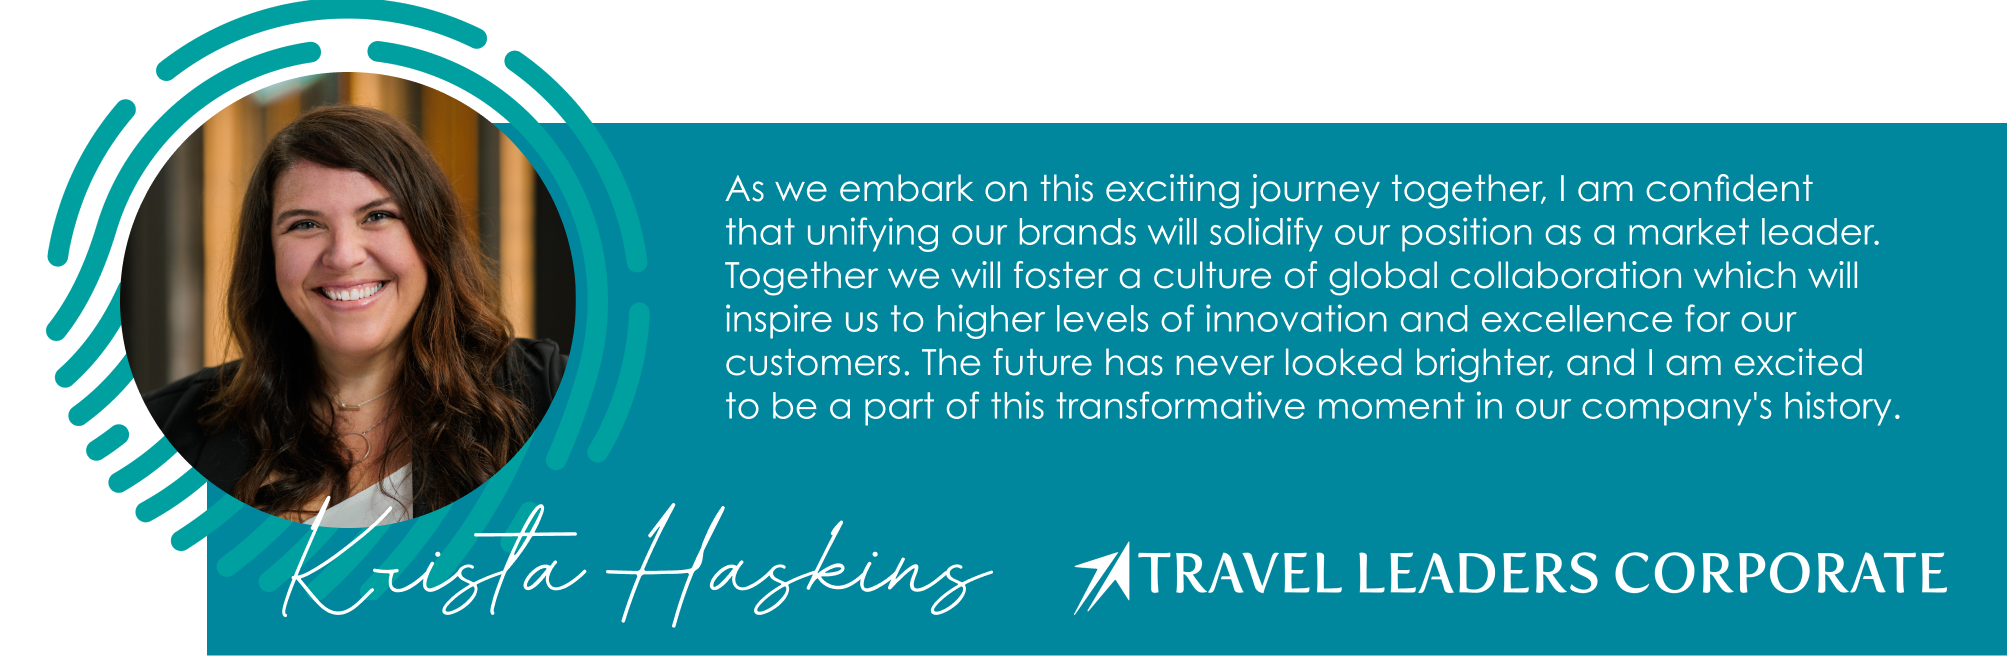 As we embark on this exciting journey together, I am confident  that unifying our brands will solidify our position as a market leader. Together we will foster a culture of global collaboration which will inspire us to higher levels of innovation and excellence for our customers. The future has never looked brighter, and I am excited  to be a part of this transformative moment in our company's history.